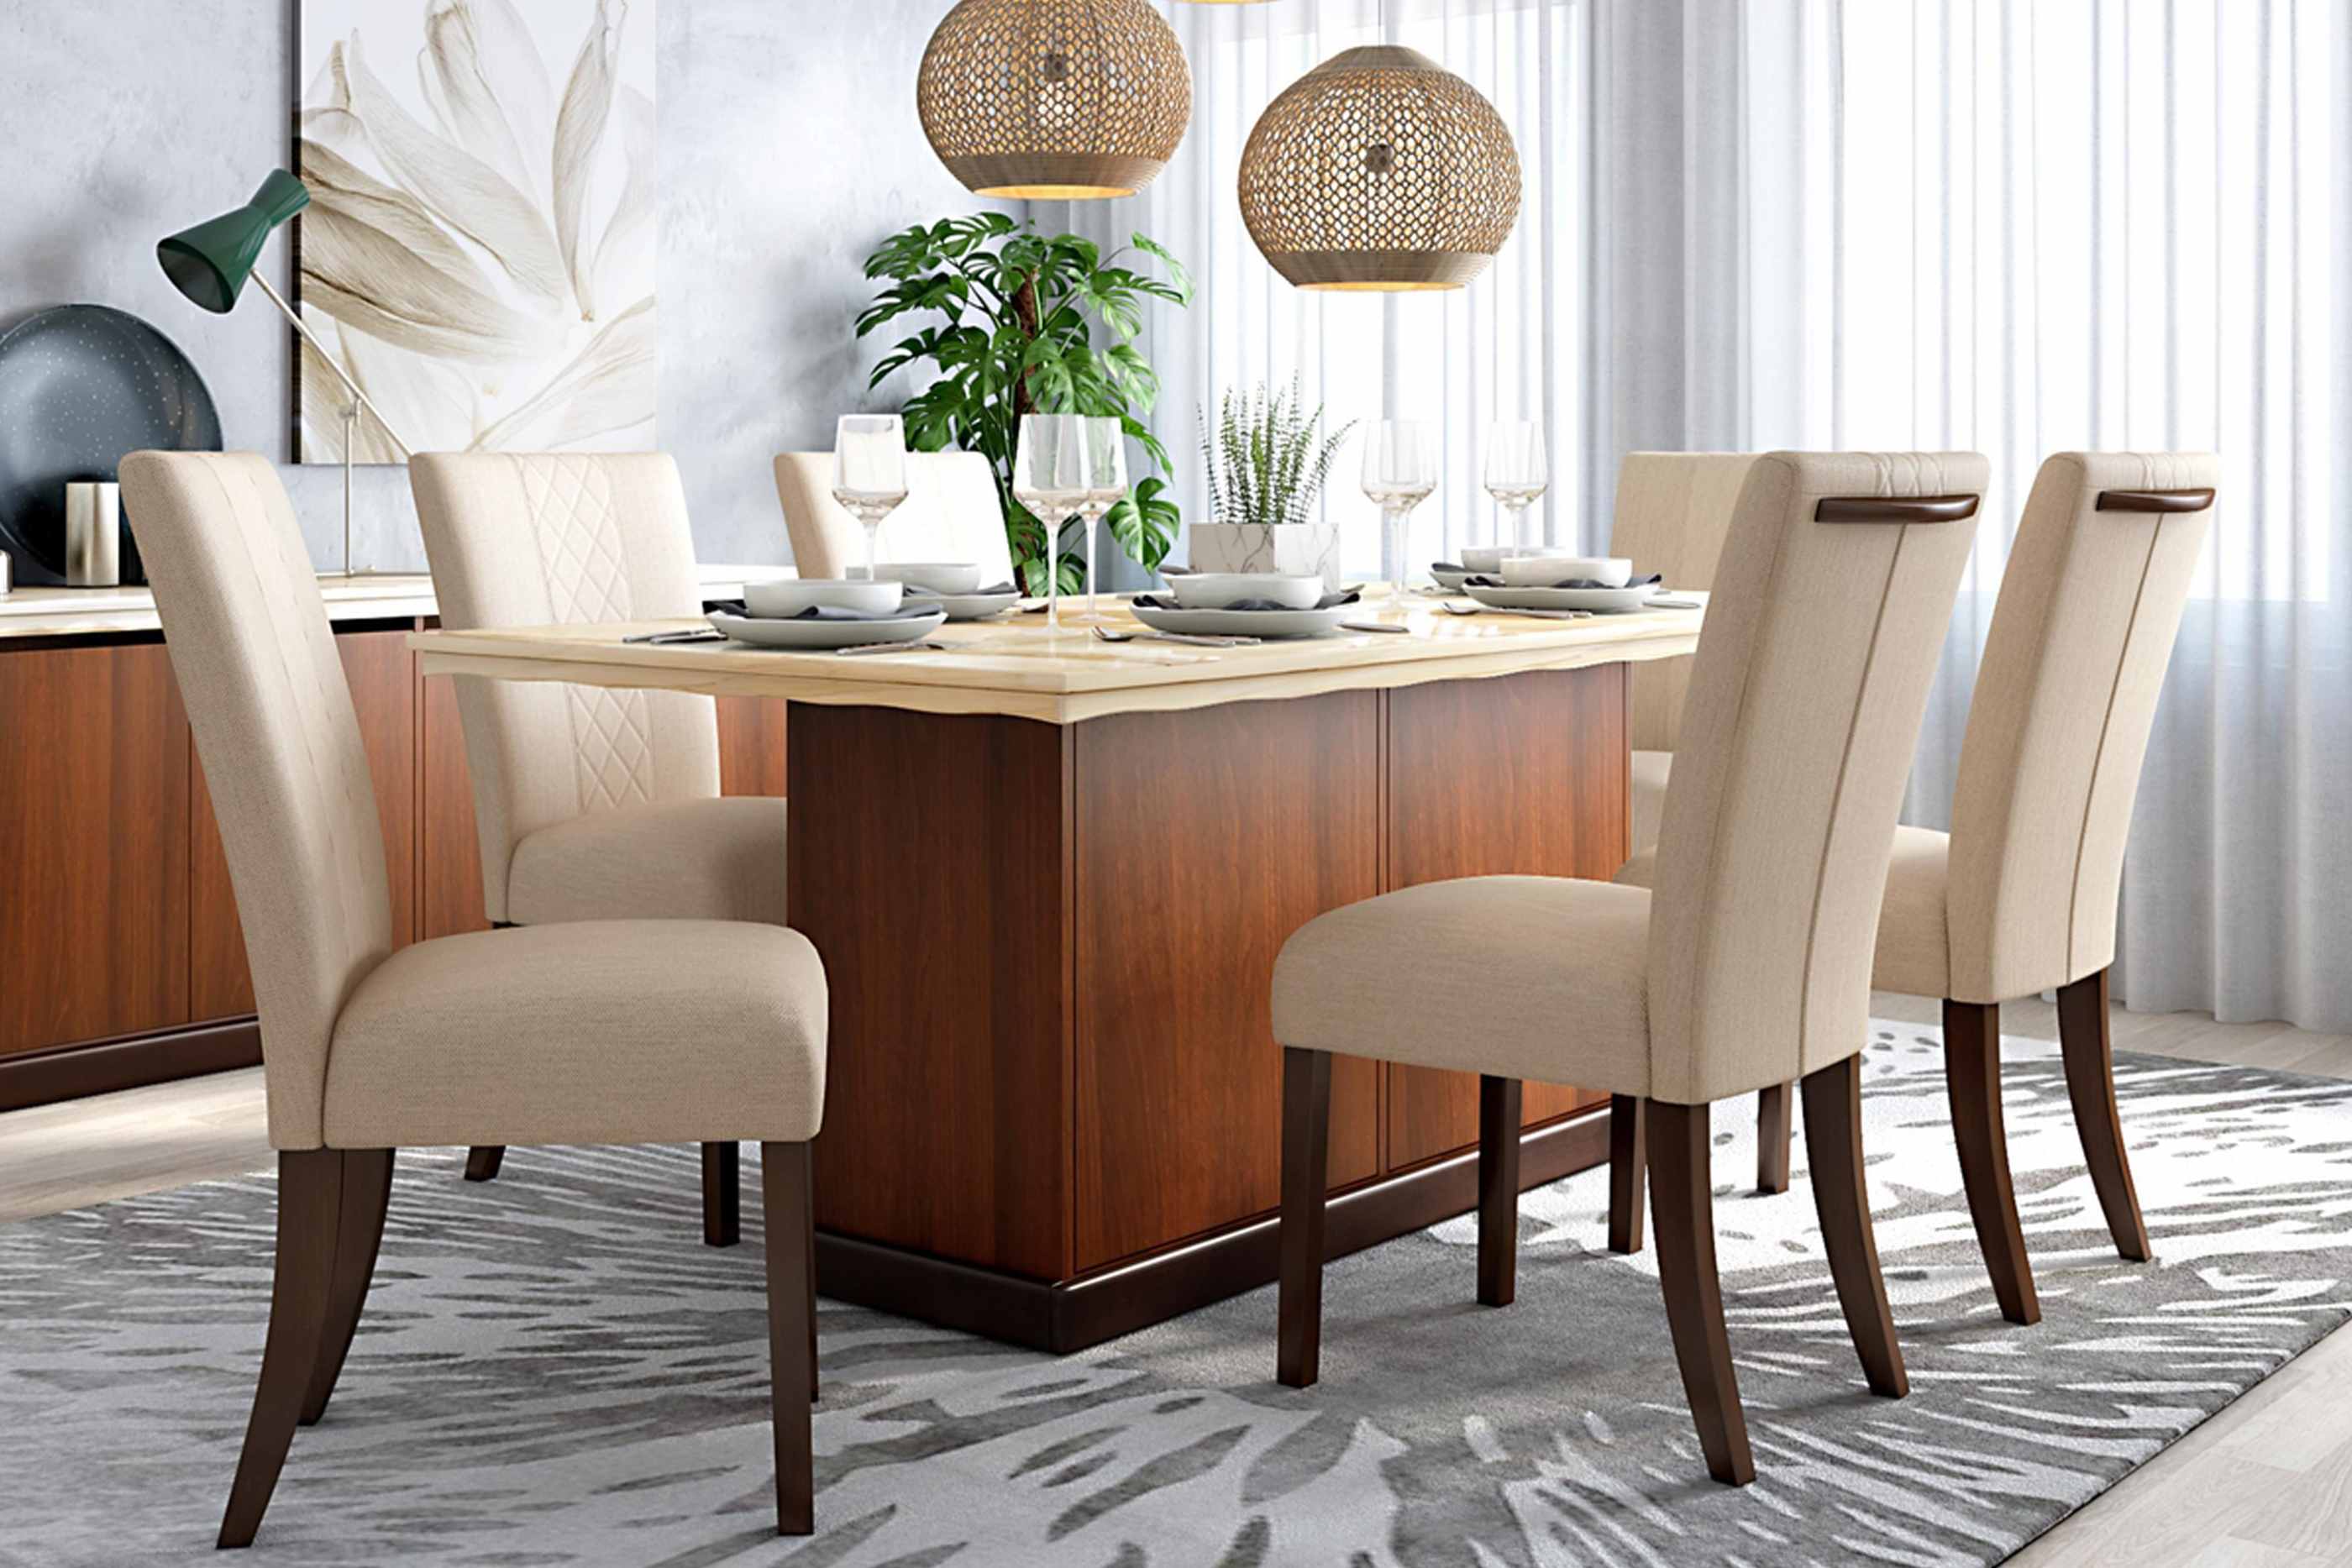 Lux Dining Table With 6 Chairs